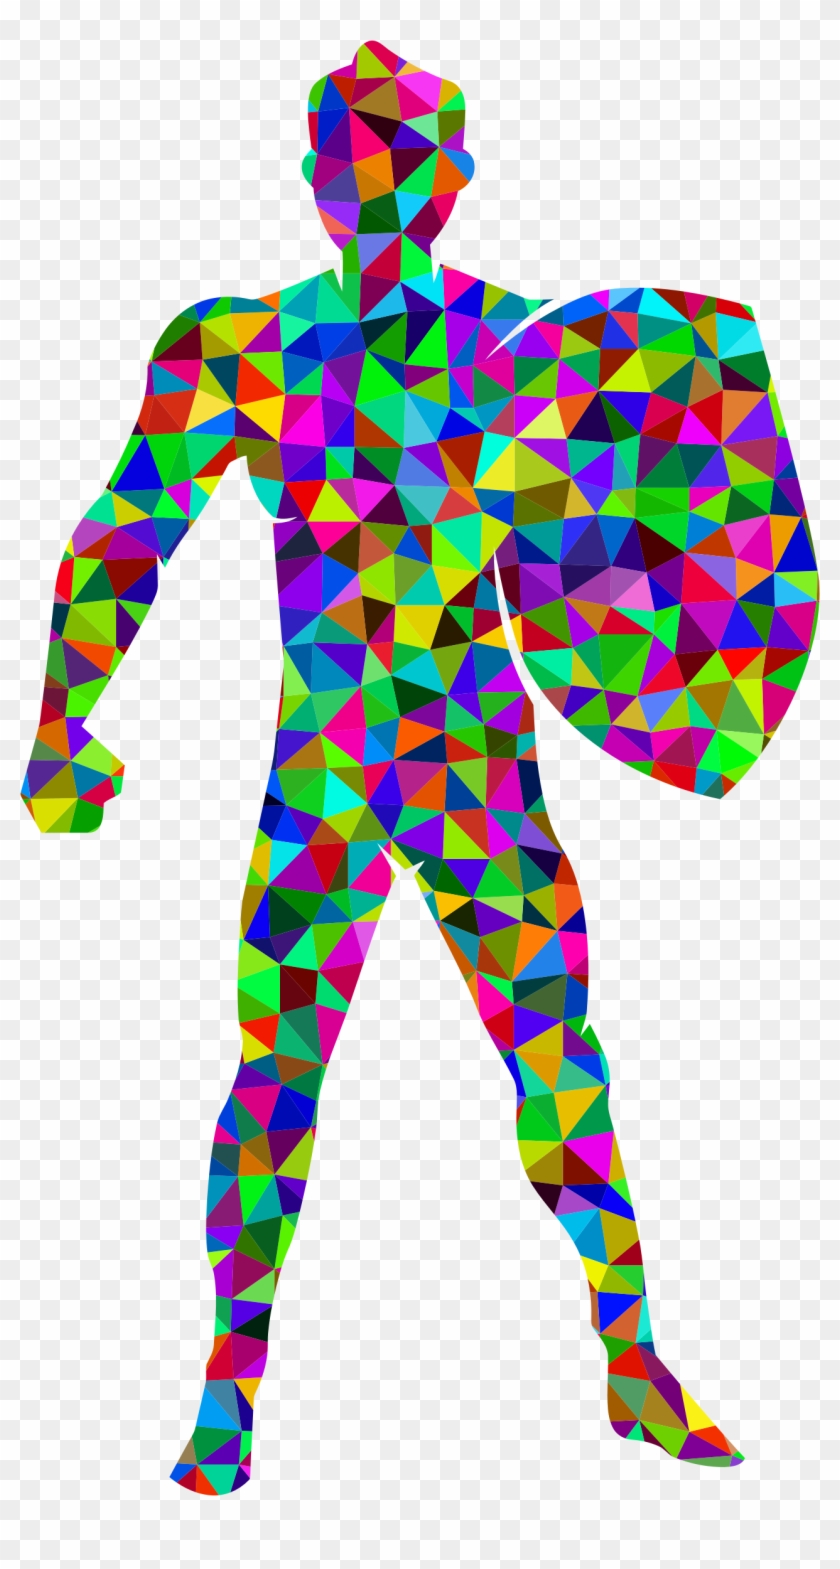 This Free Icons Png Design Of Prismatic Low Poly Man - Zazzle Bunter Drache Ipad Mini Hülle #814724